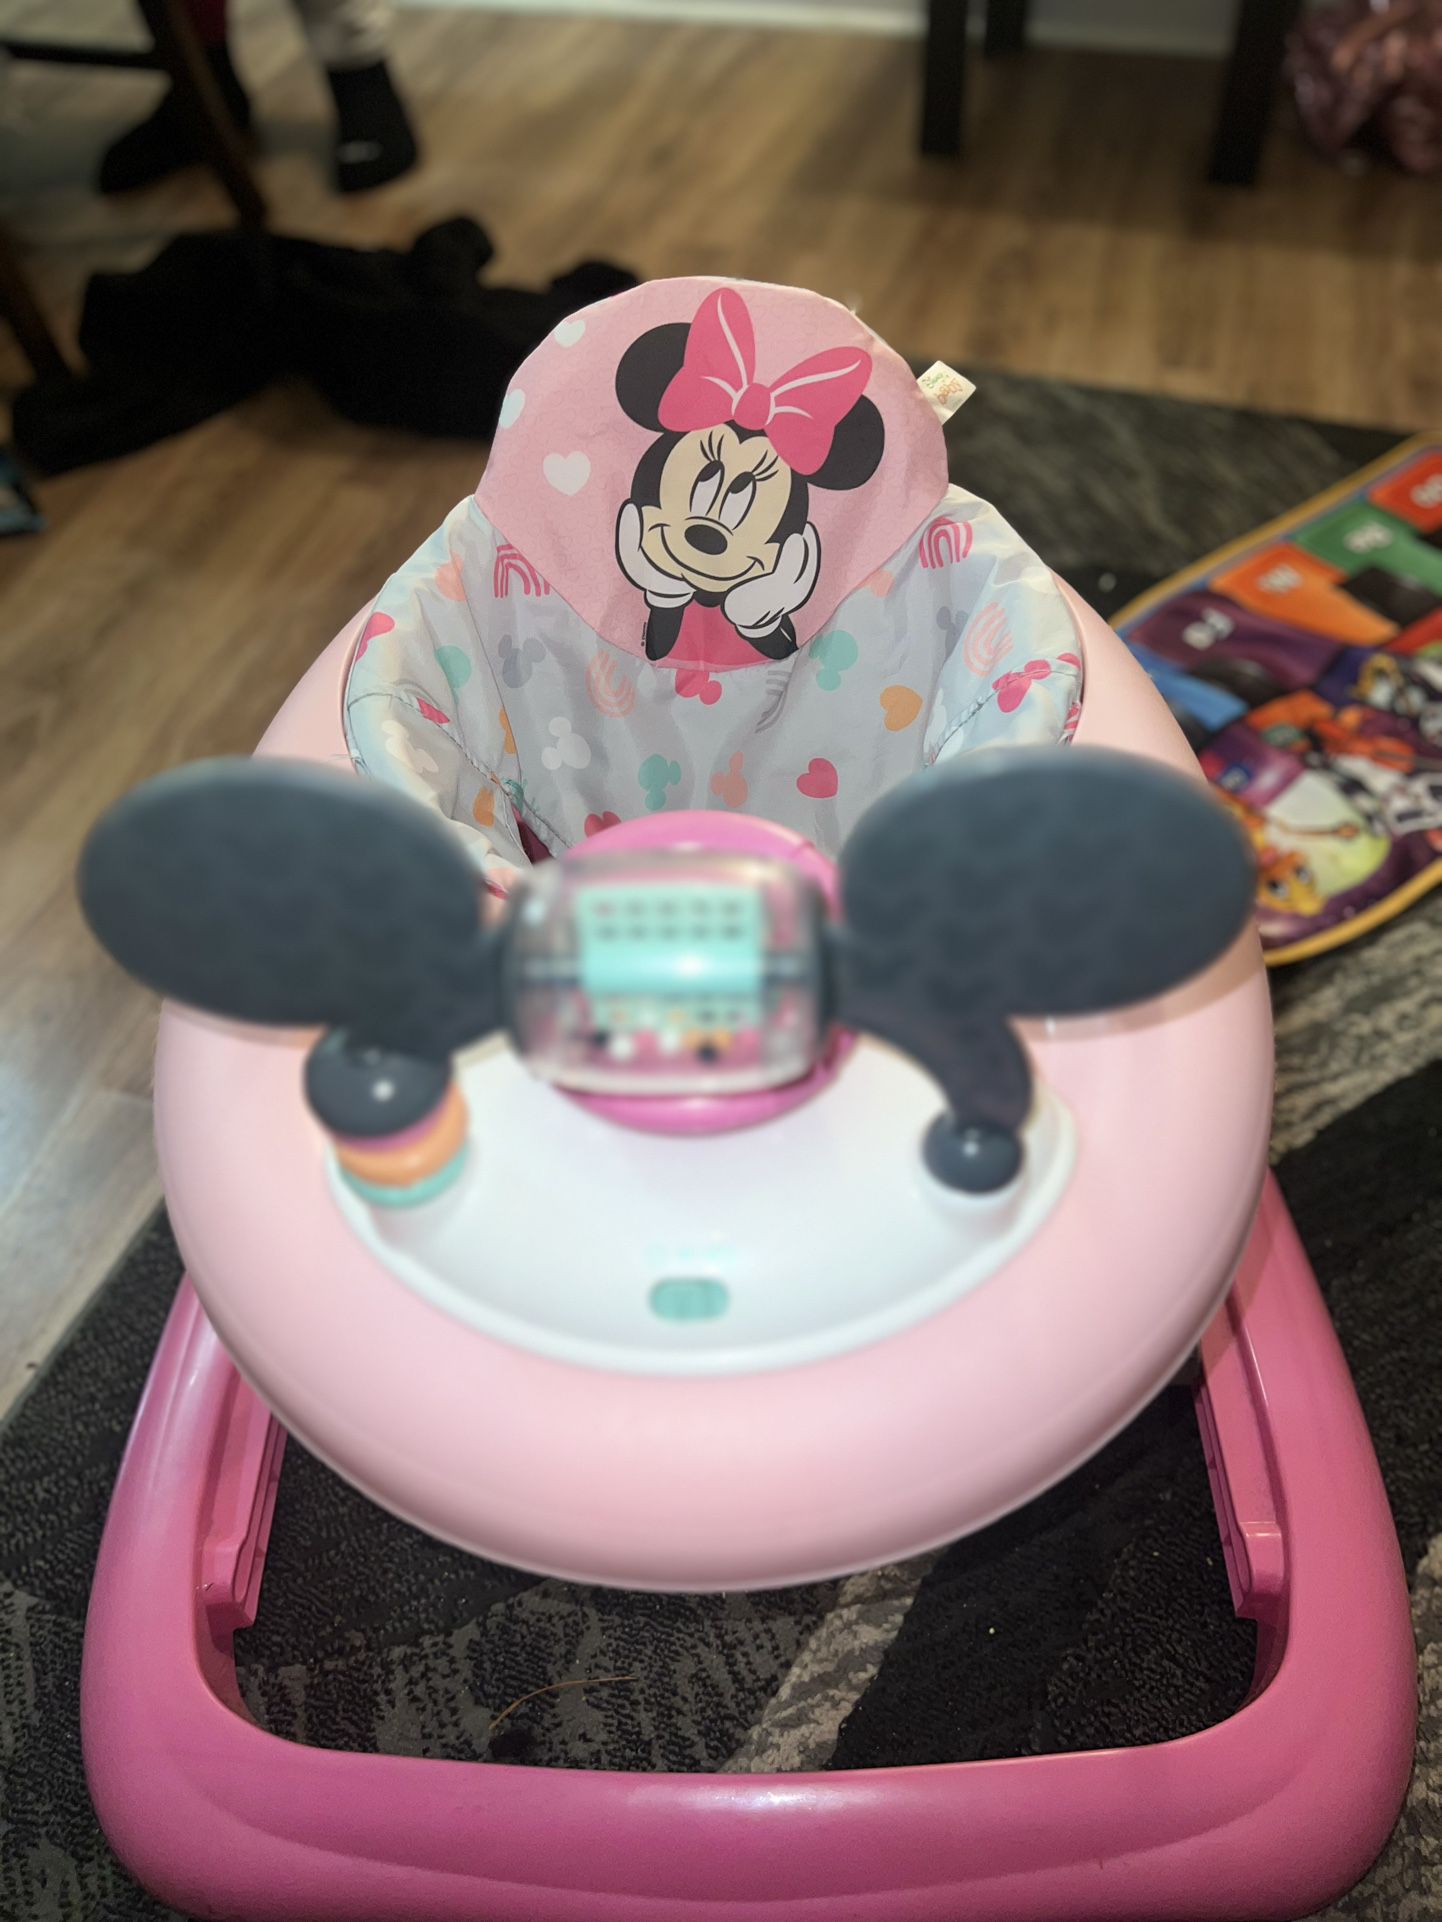 Minnie Mouse Walker